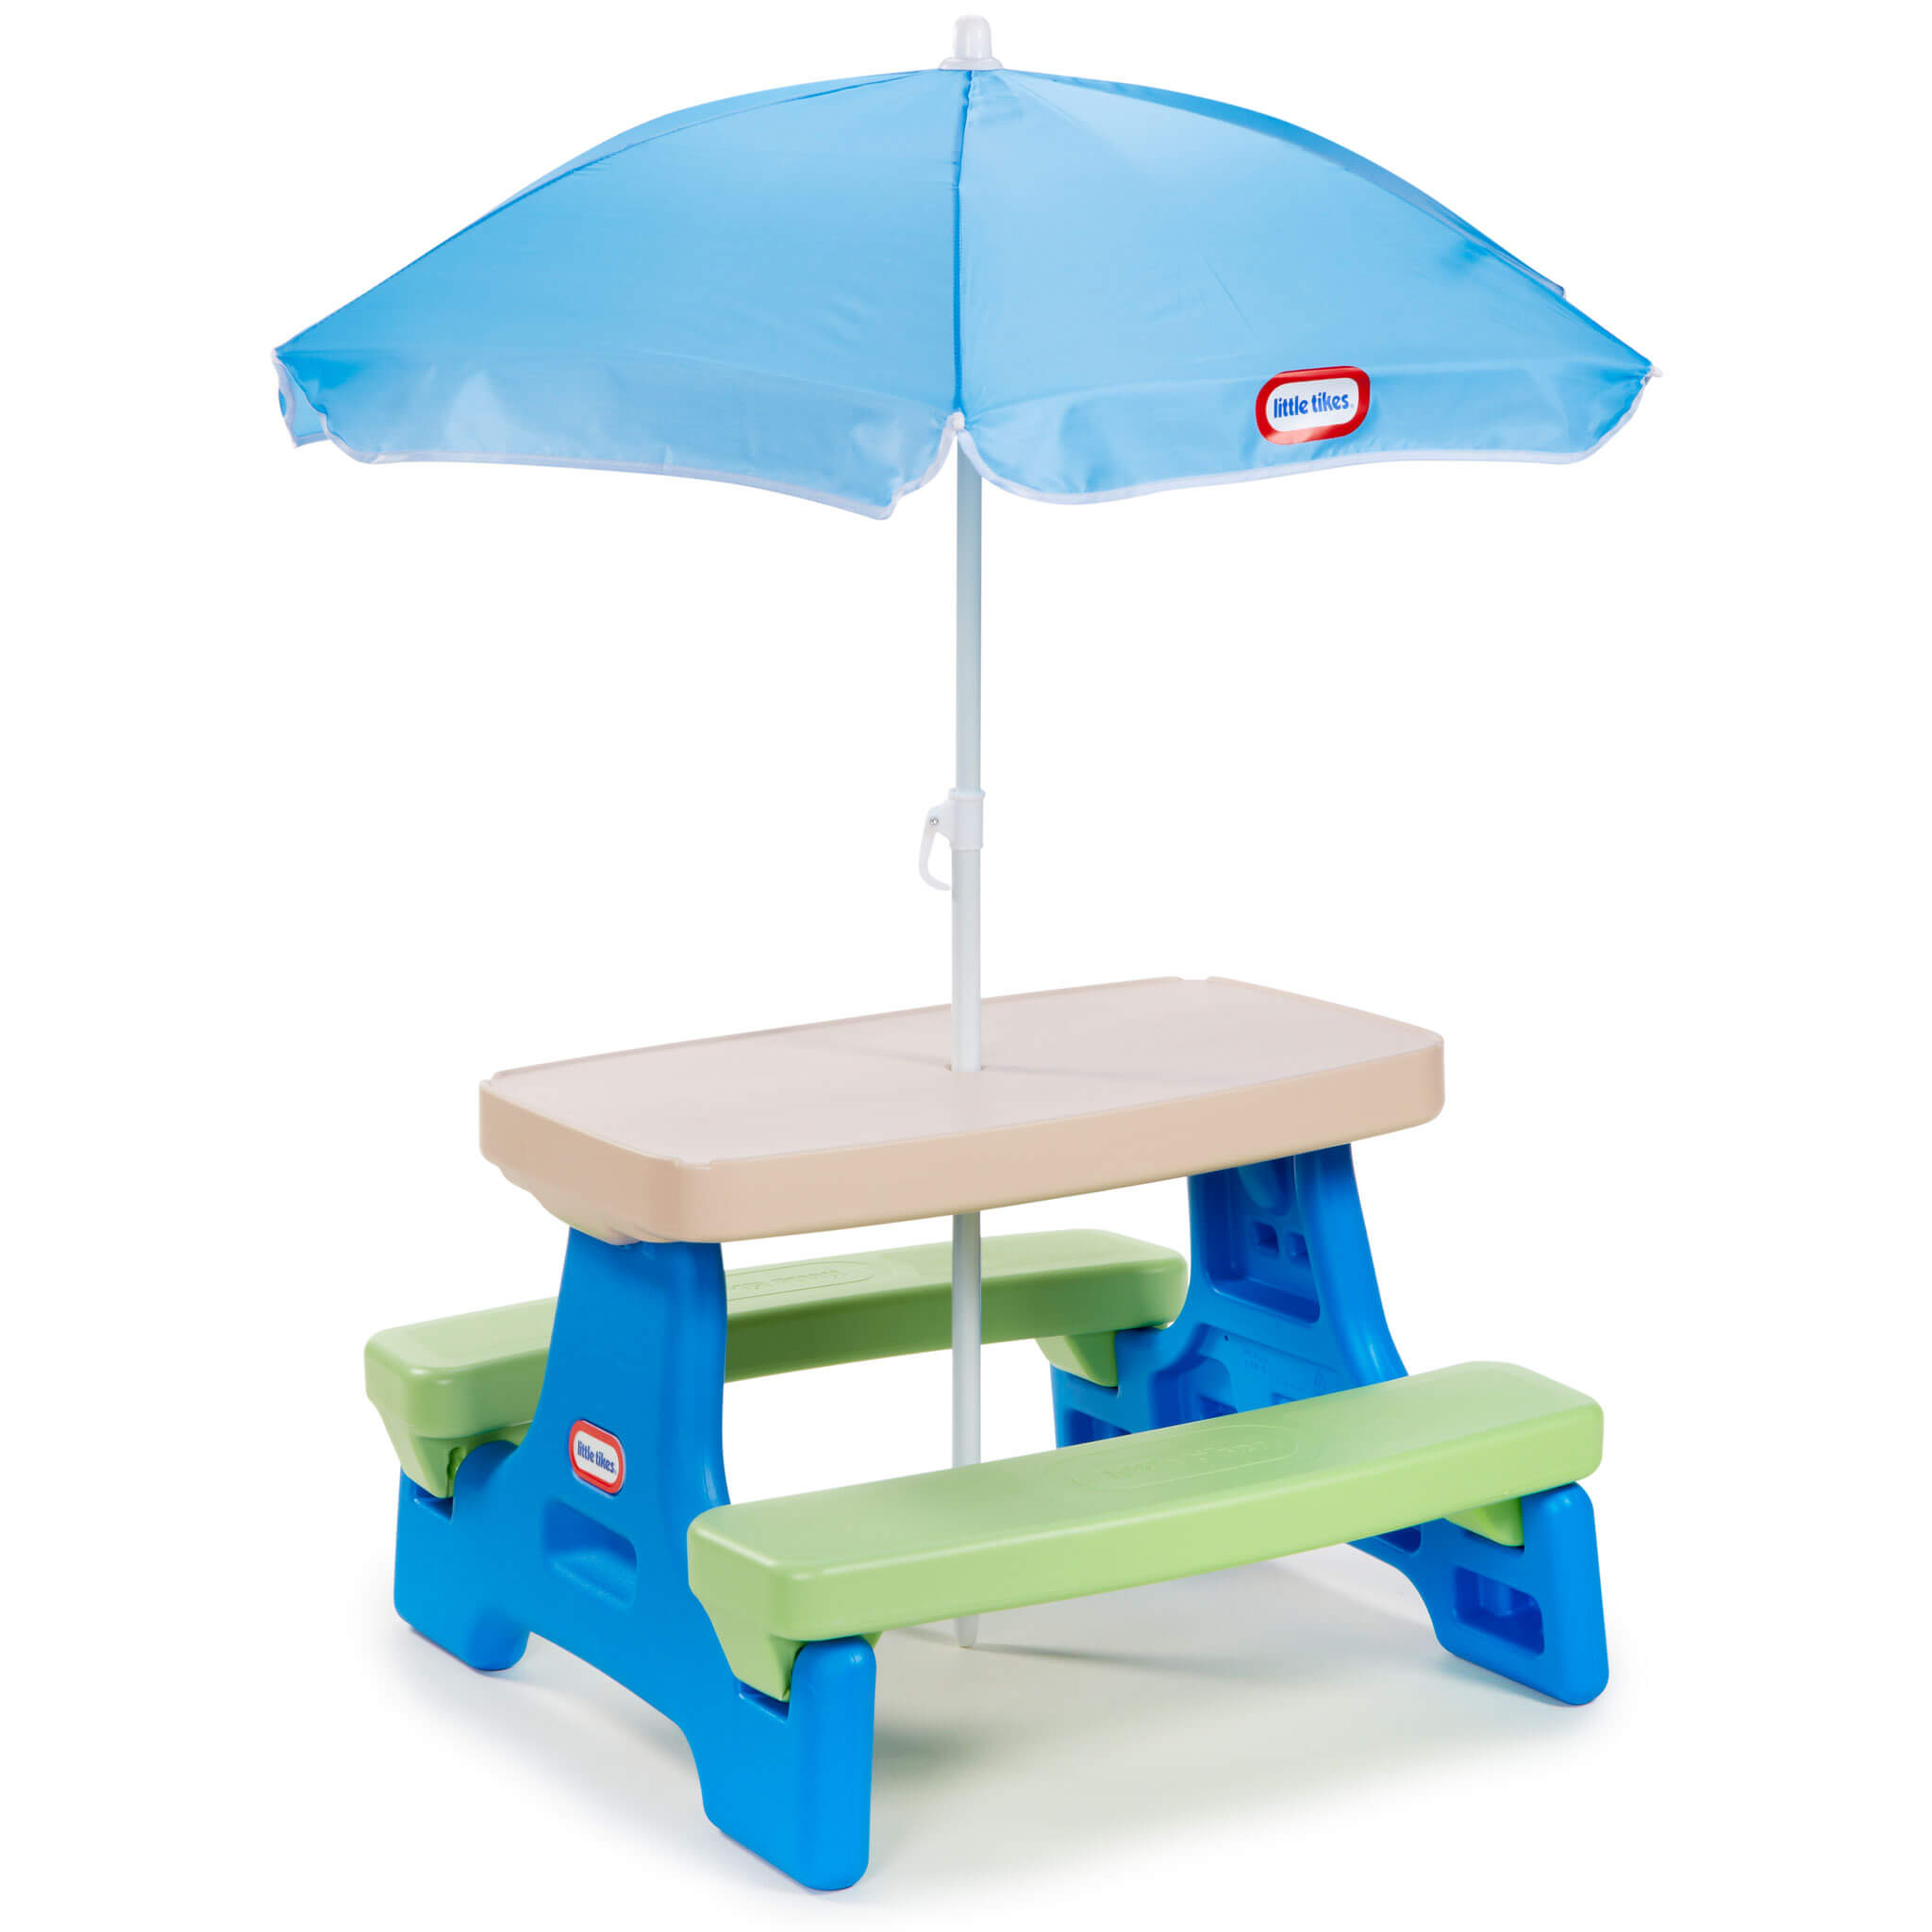 Little Tikes Easy Store Jr. Play Table with Umbrella - BlueGreen